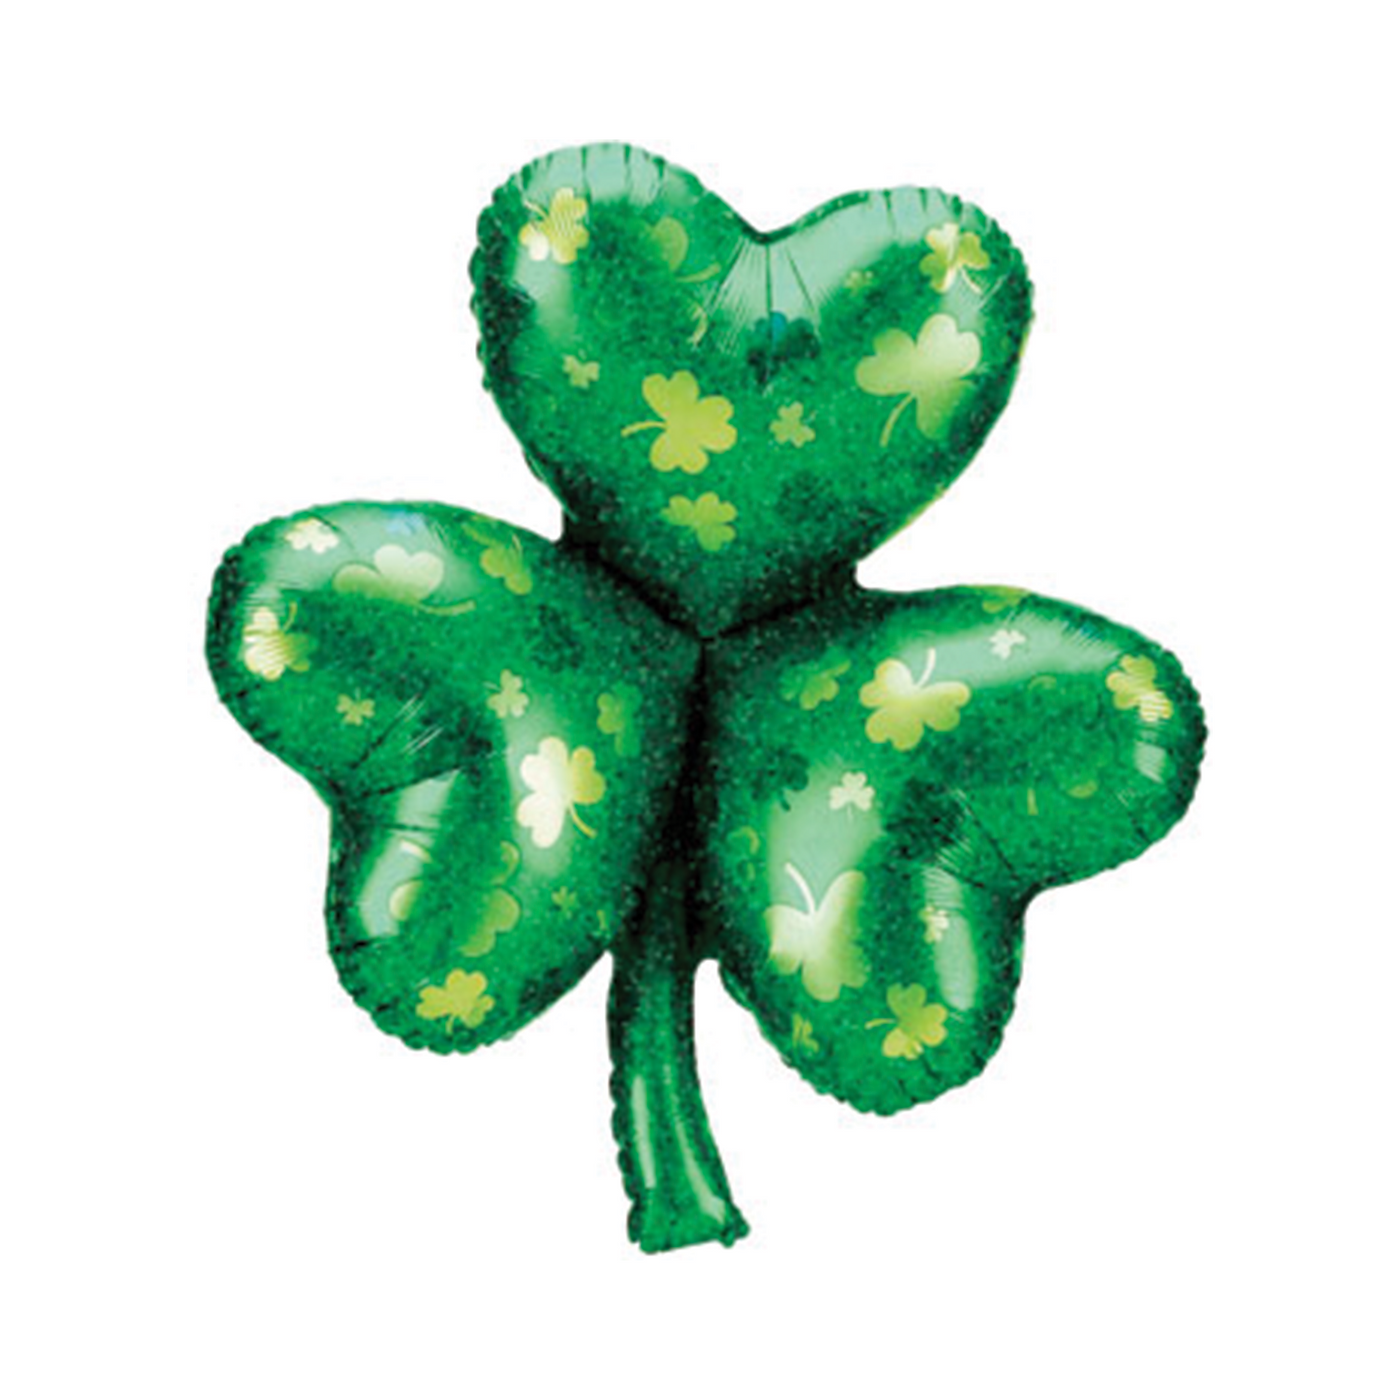 Shimmering Holographic Shamrock Balloon perfect for your St. Patrick's day party